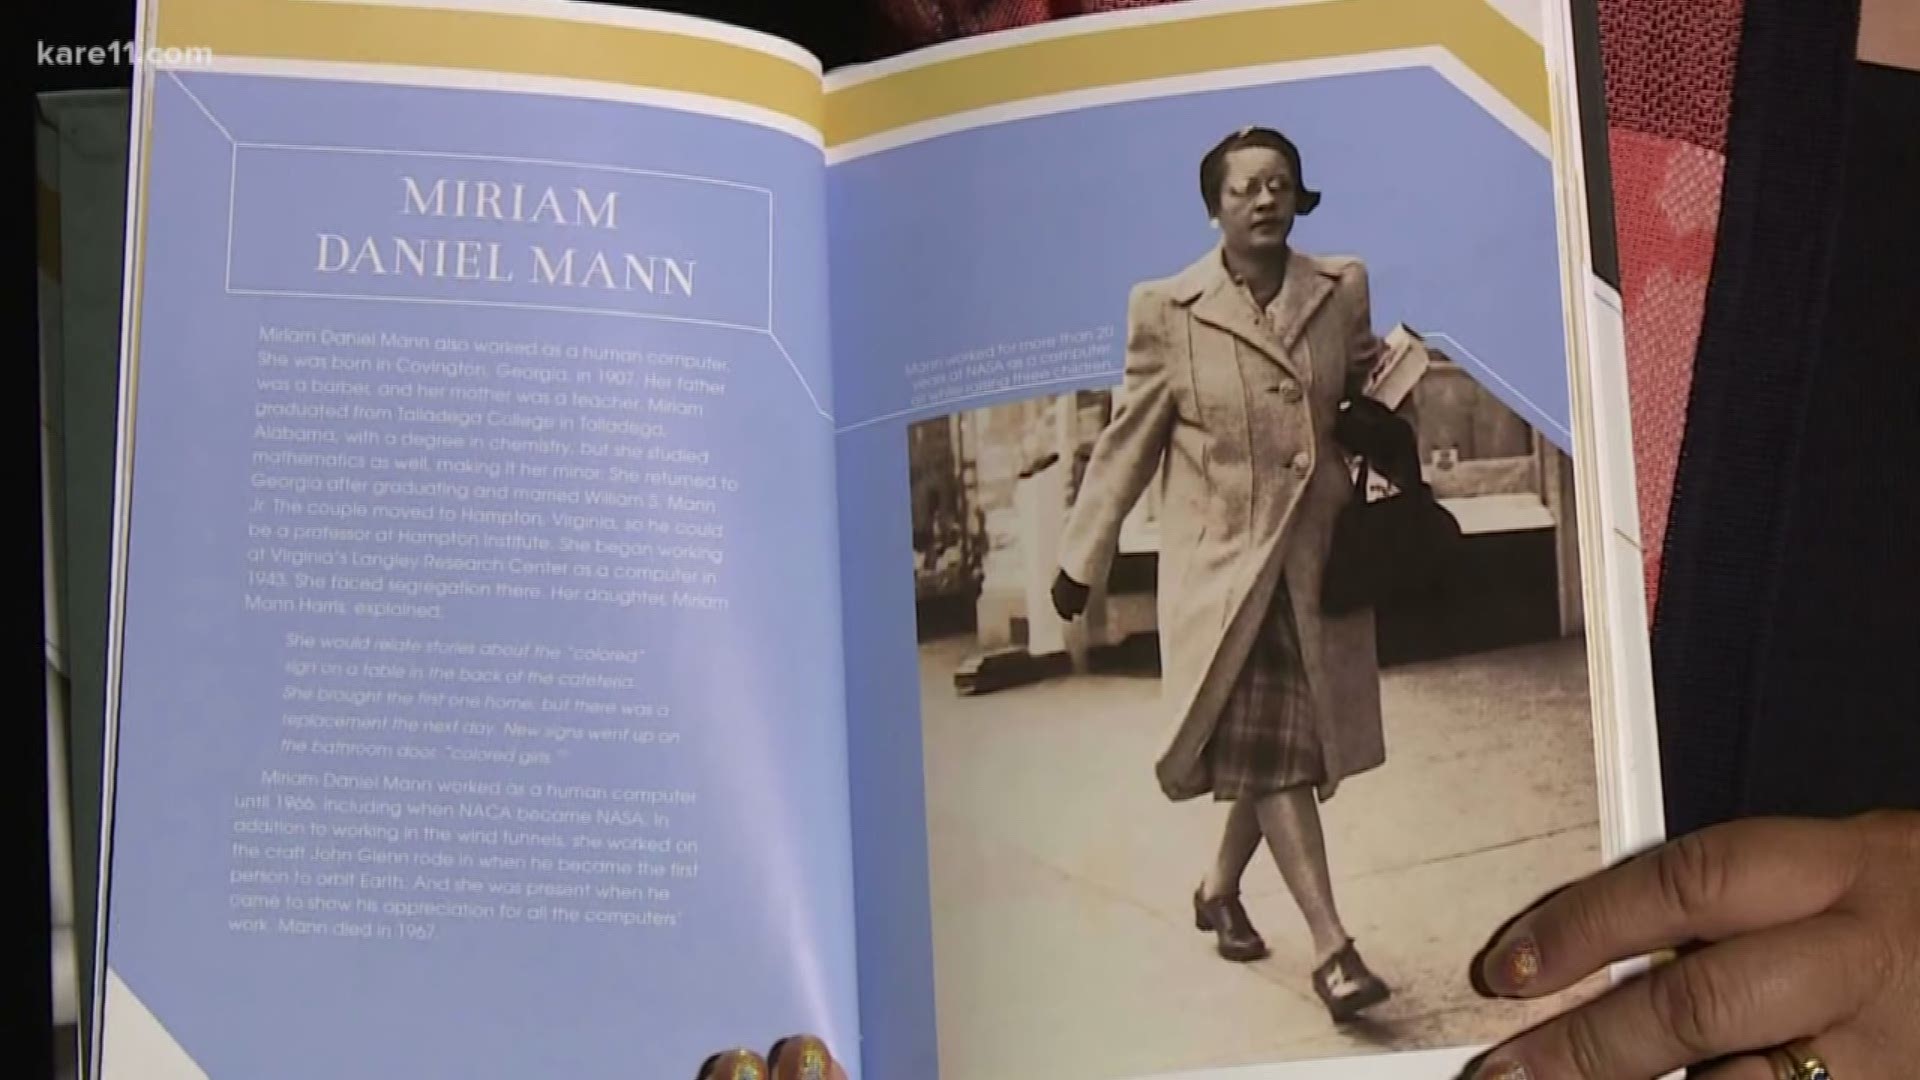 Miriam Daniel Mann was one of 11 African American women mathematicians responsible for helping John Glenn get to orbit - which paved the way for NASA's moon landing.